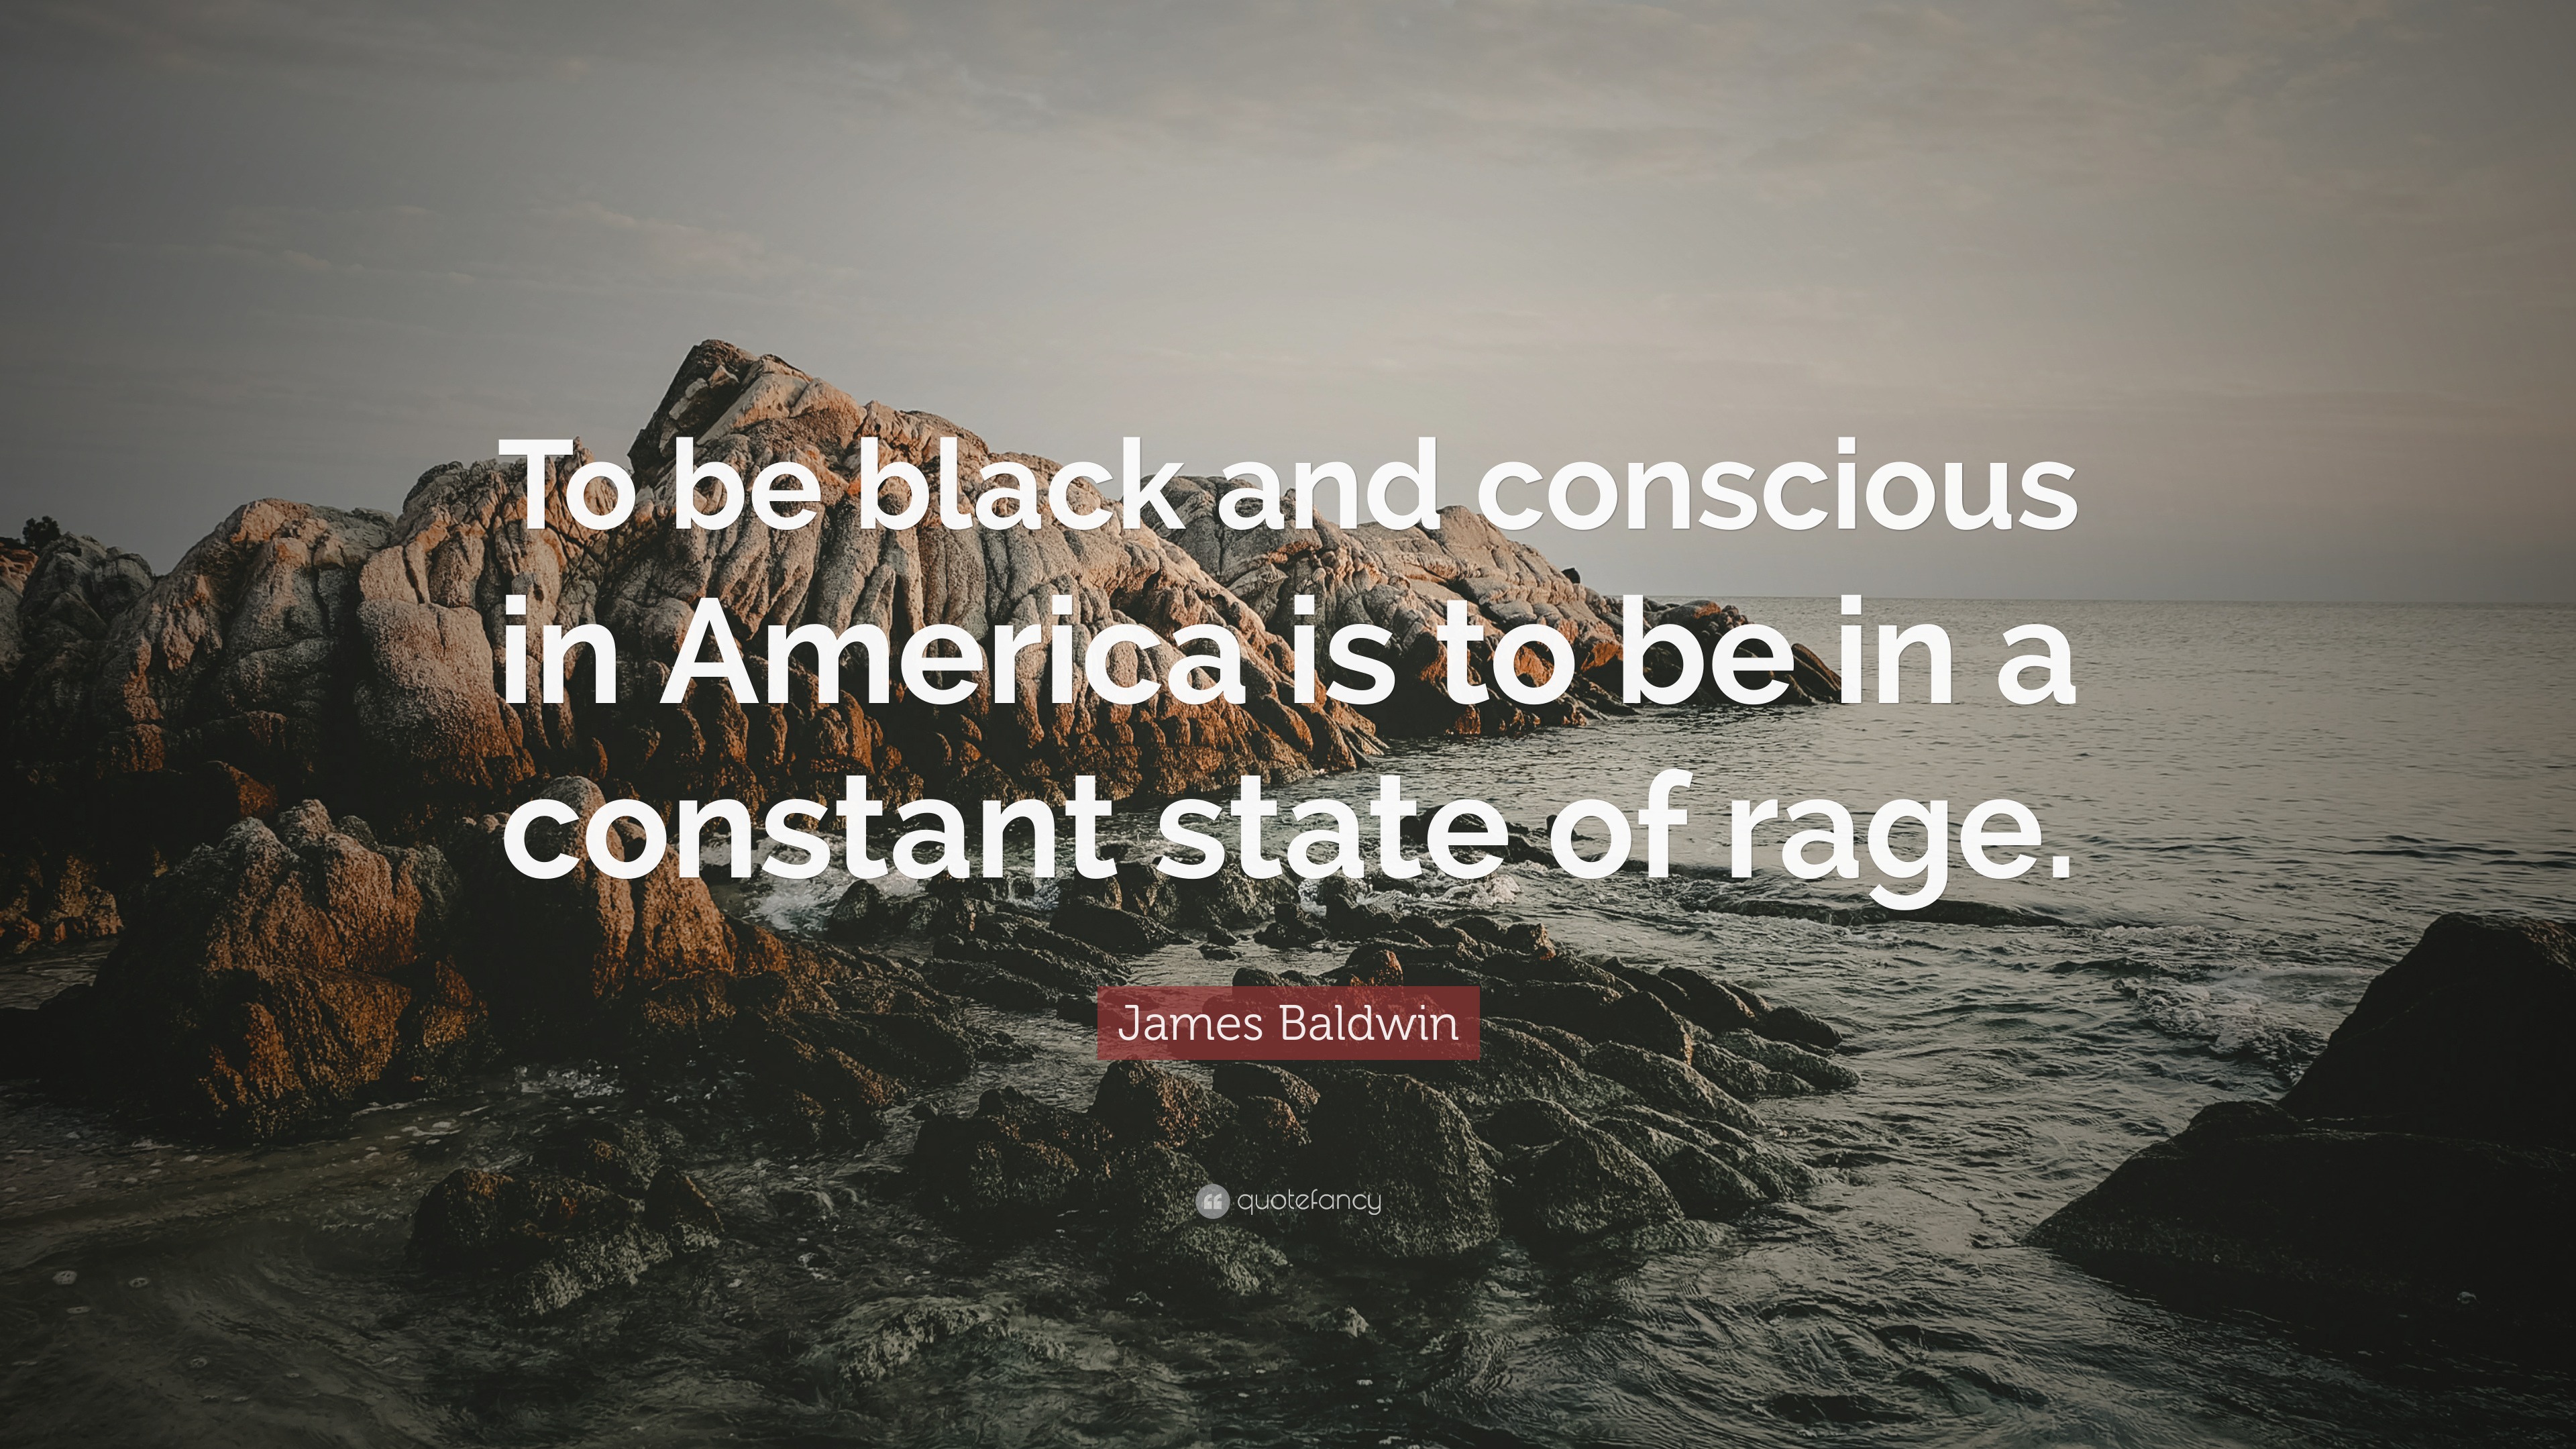 James Baldwin Quote: “To be black and conscious in America is to be in